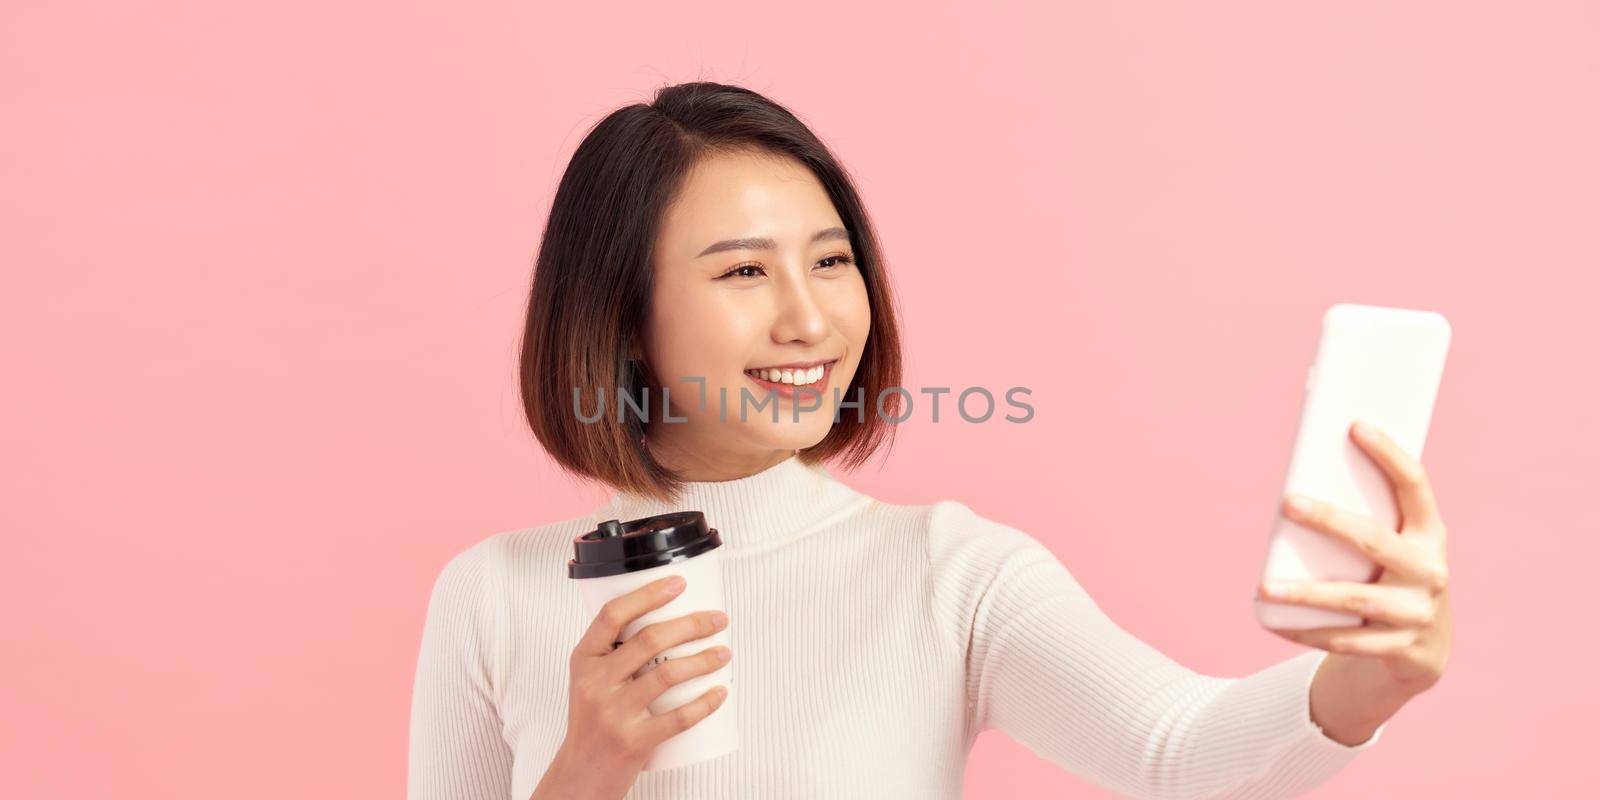 Portrait of a smiling attractive woman taking a selfie while holding take away coffee cup over pink background